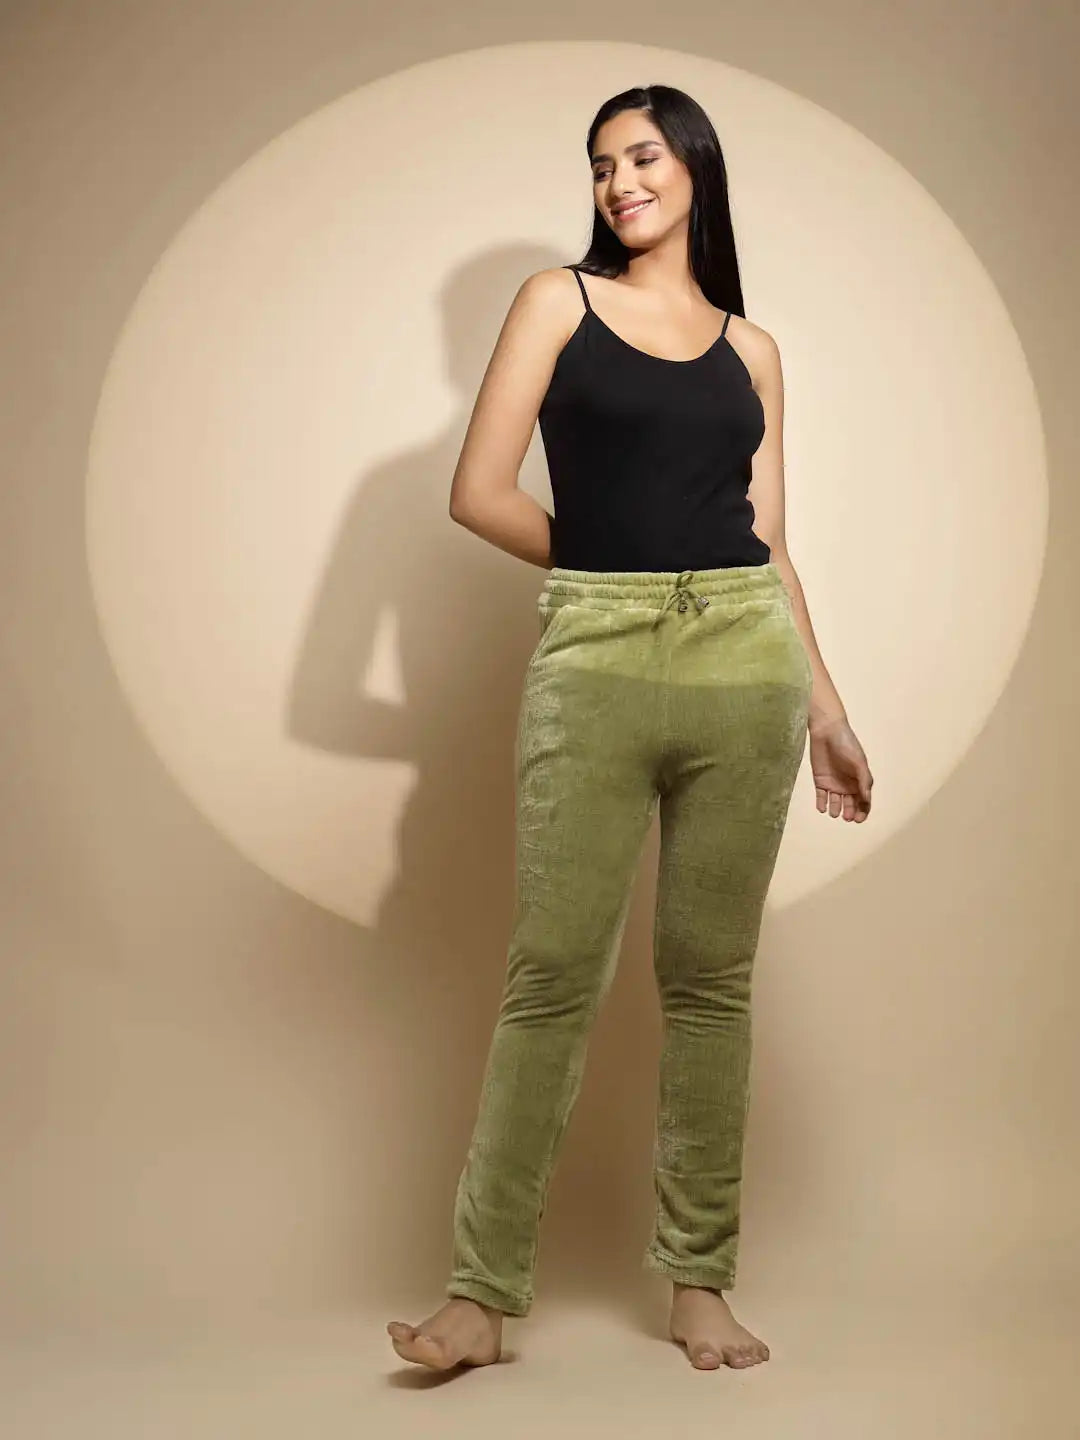 Green Solid Low Rise Cotton Lower